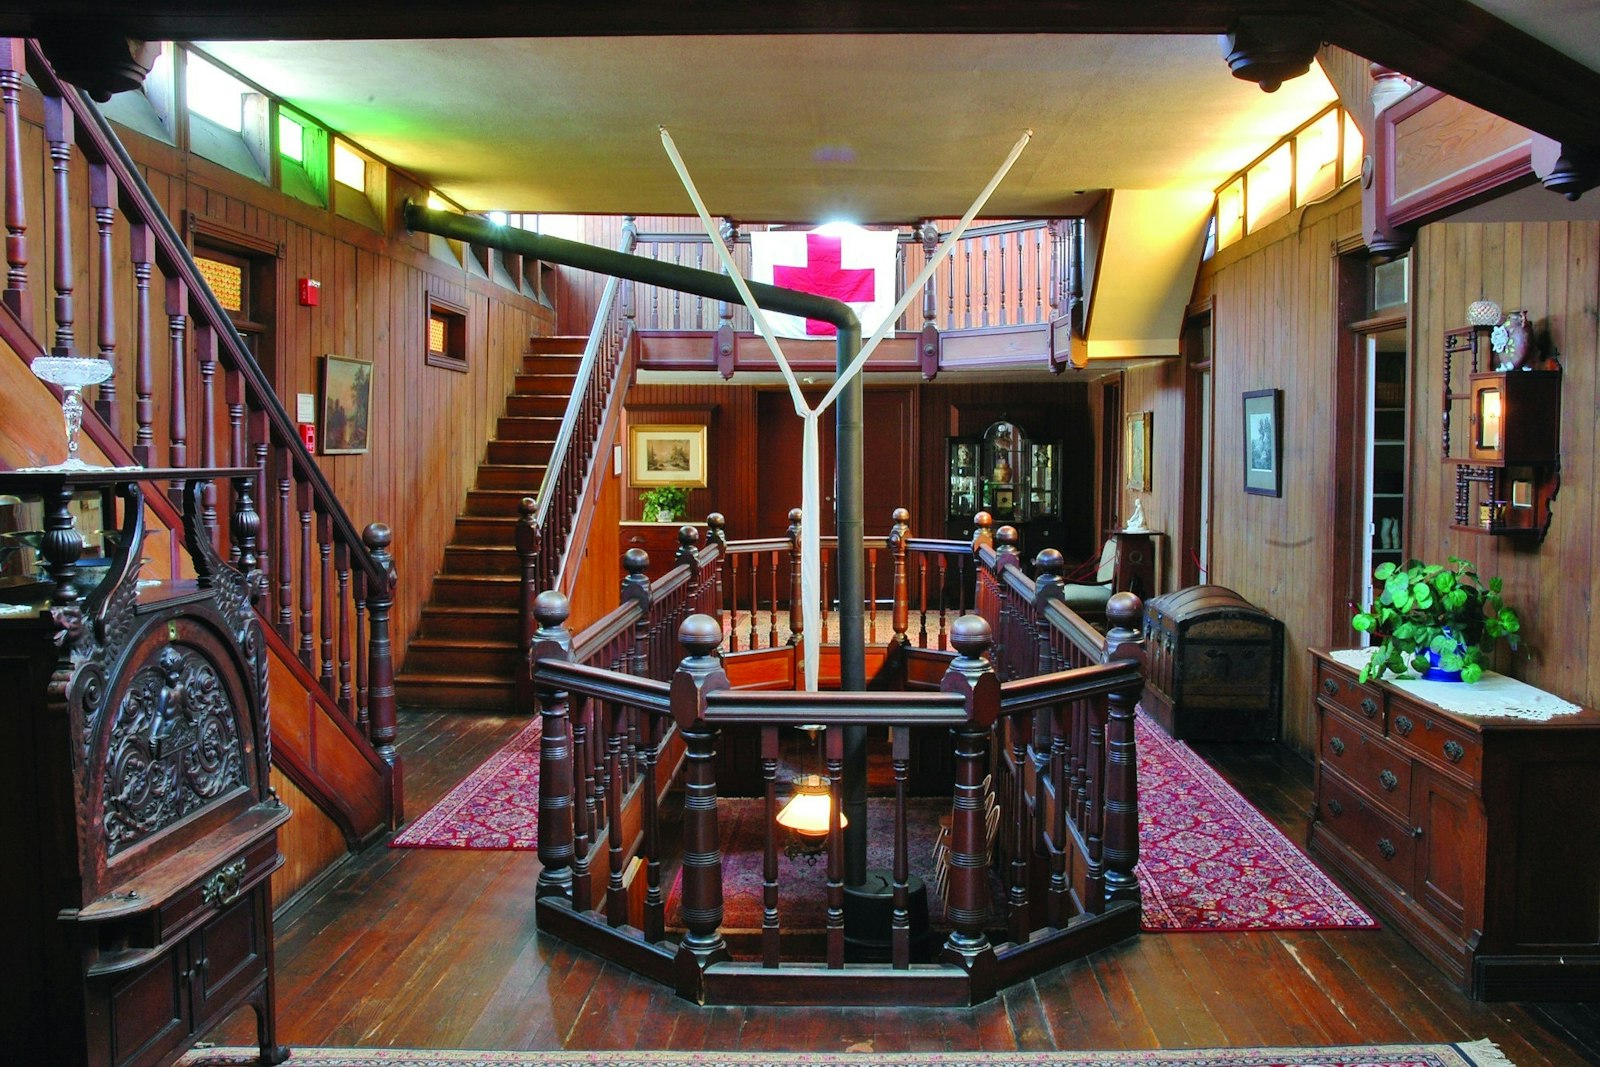 Interior of a wood paneled home with a staircase and a Red Cross flag hanging on bannisters